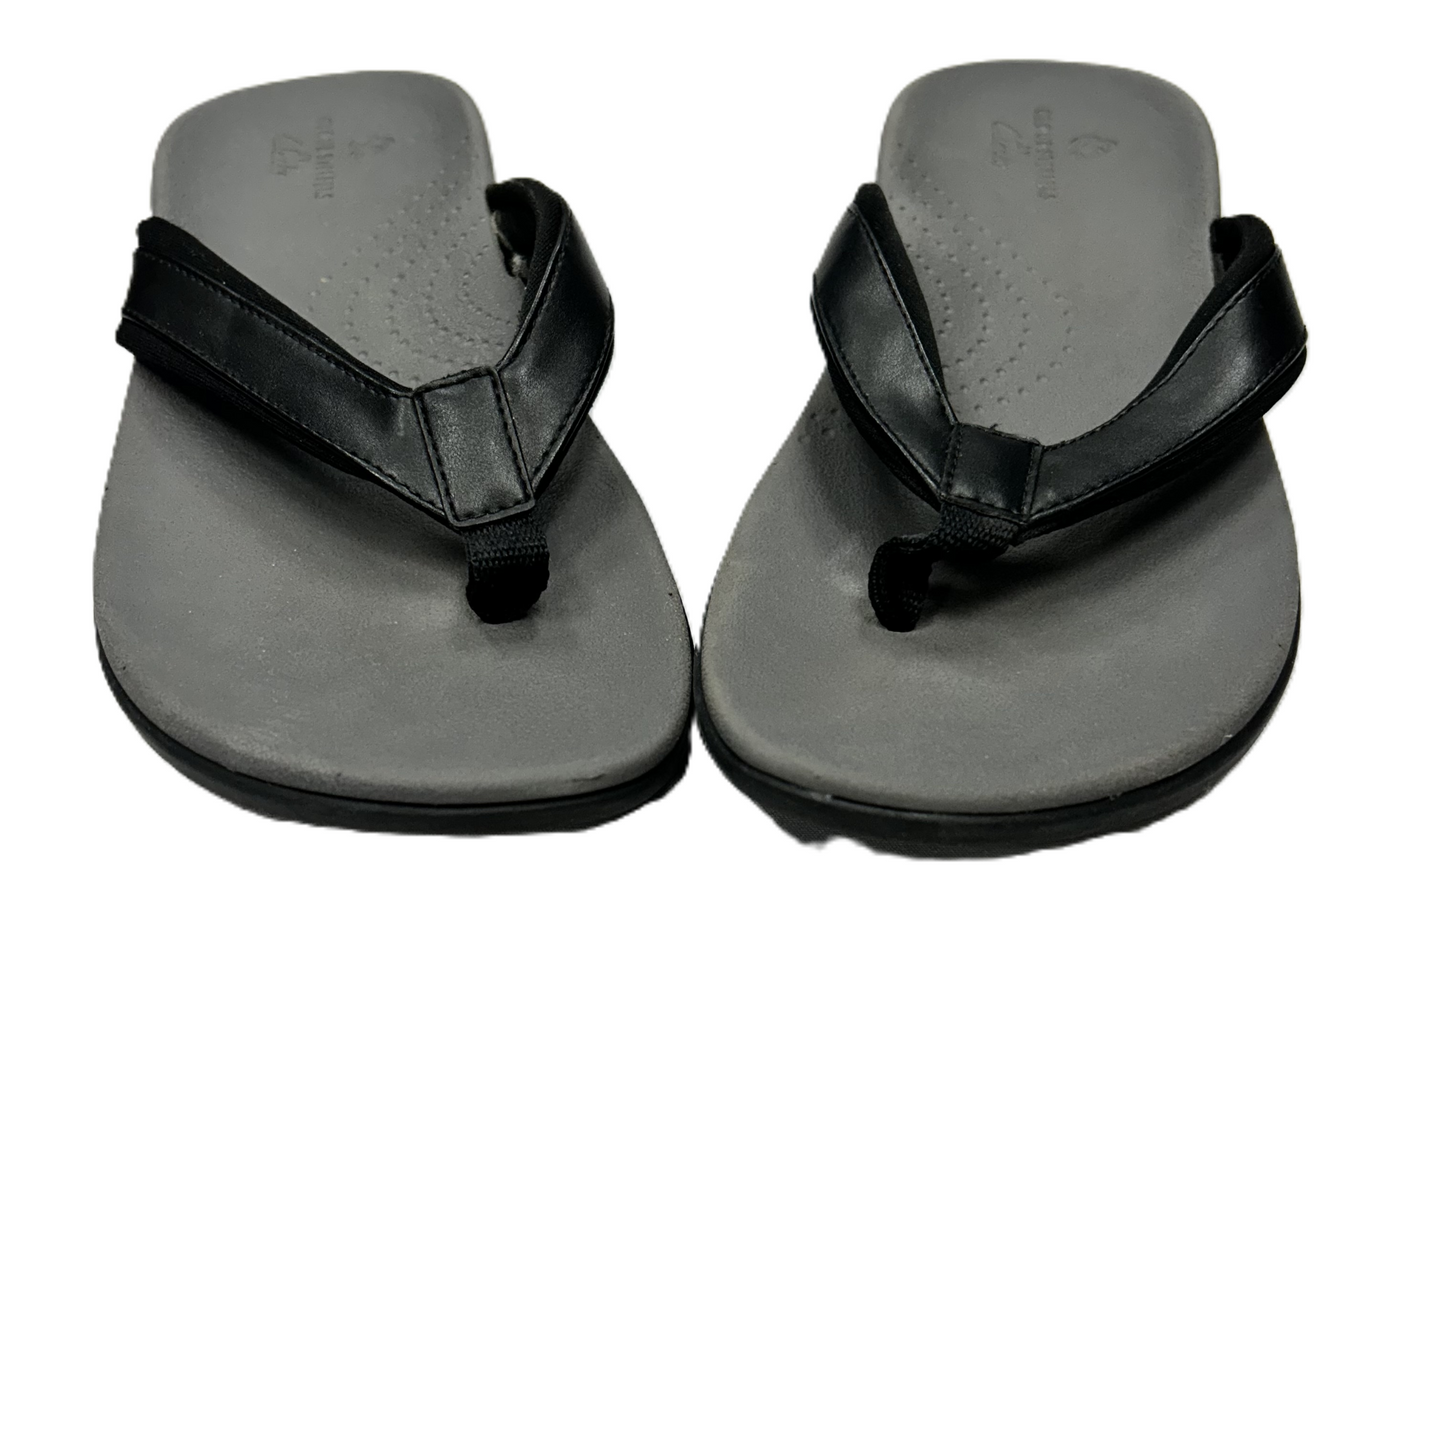 Black & Grey Sandals Flats By Clarks, Size: 9